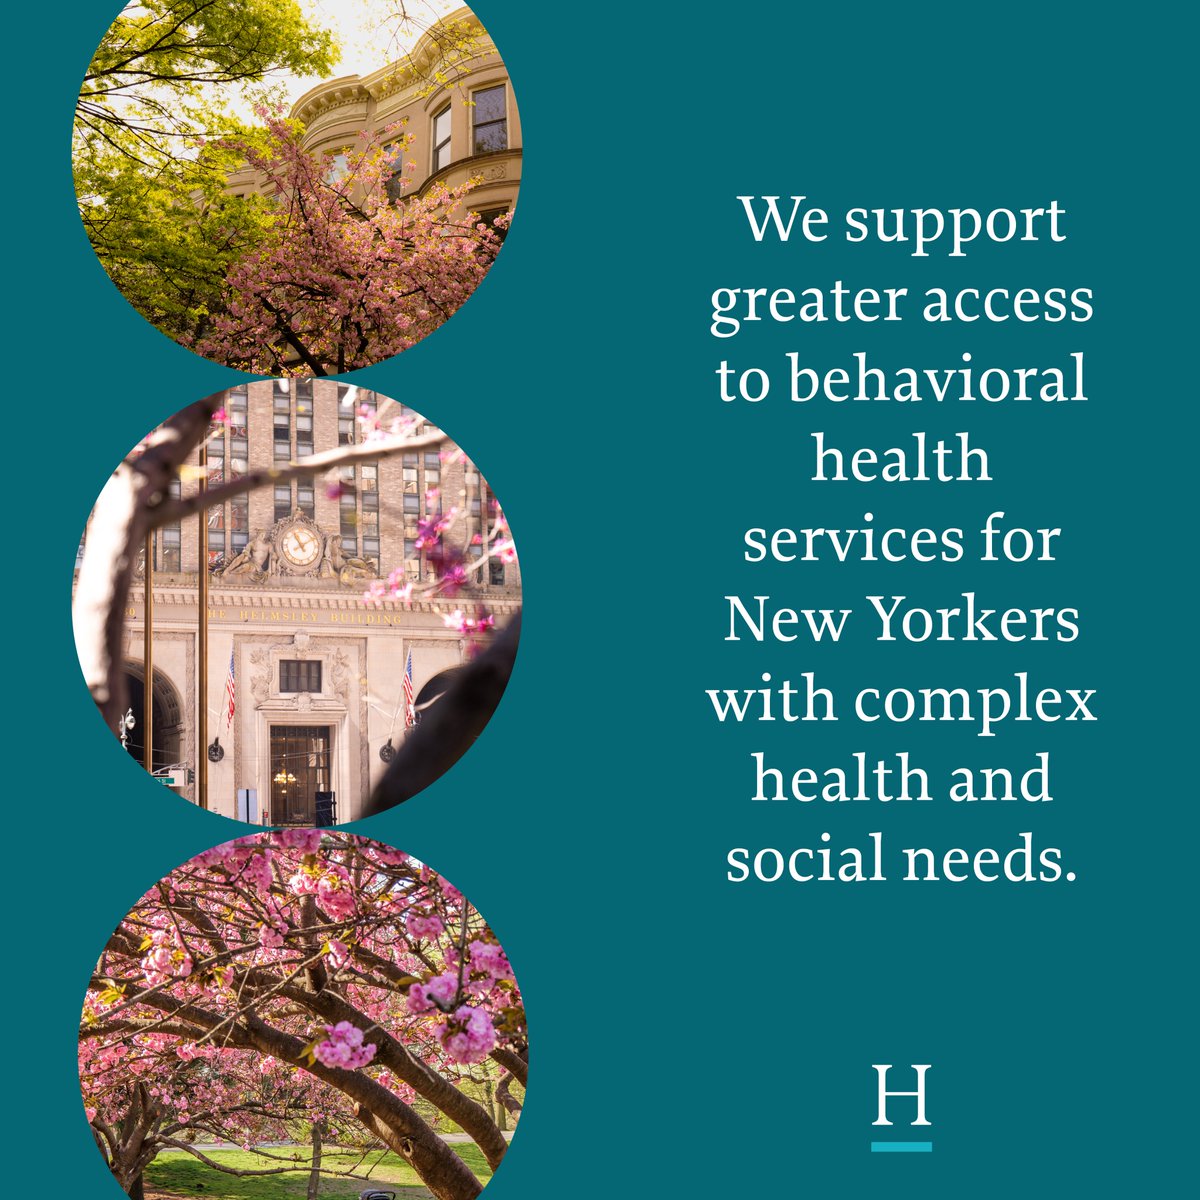 “For New Yorkers who have some of the most complex health and social needs, a range of personalized care options is needed to achieve long-term stability,” said Tracy Perrizo, New York City Program Officer. Helmsley is working with organizations across the city’s healthcare